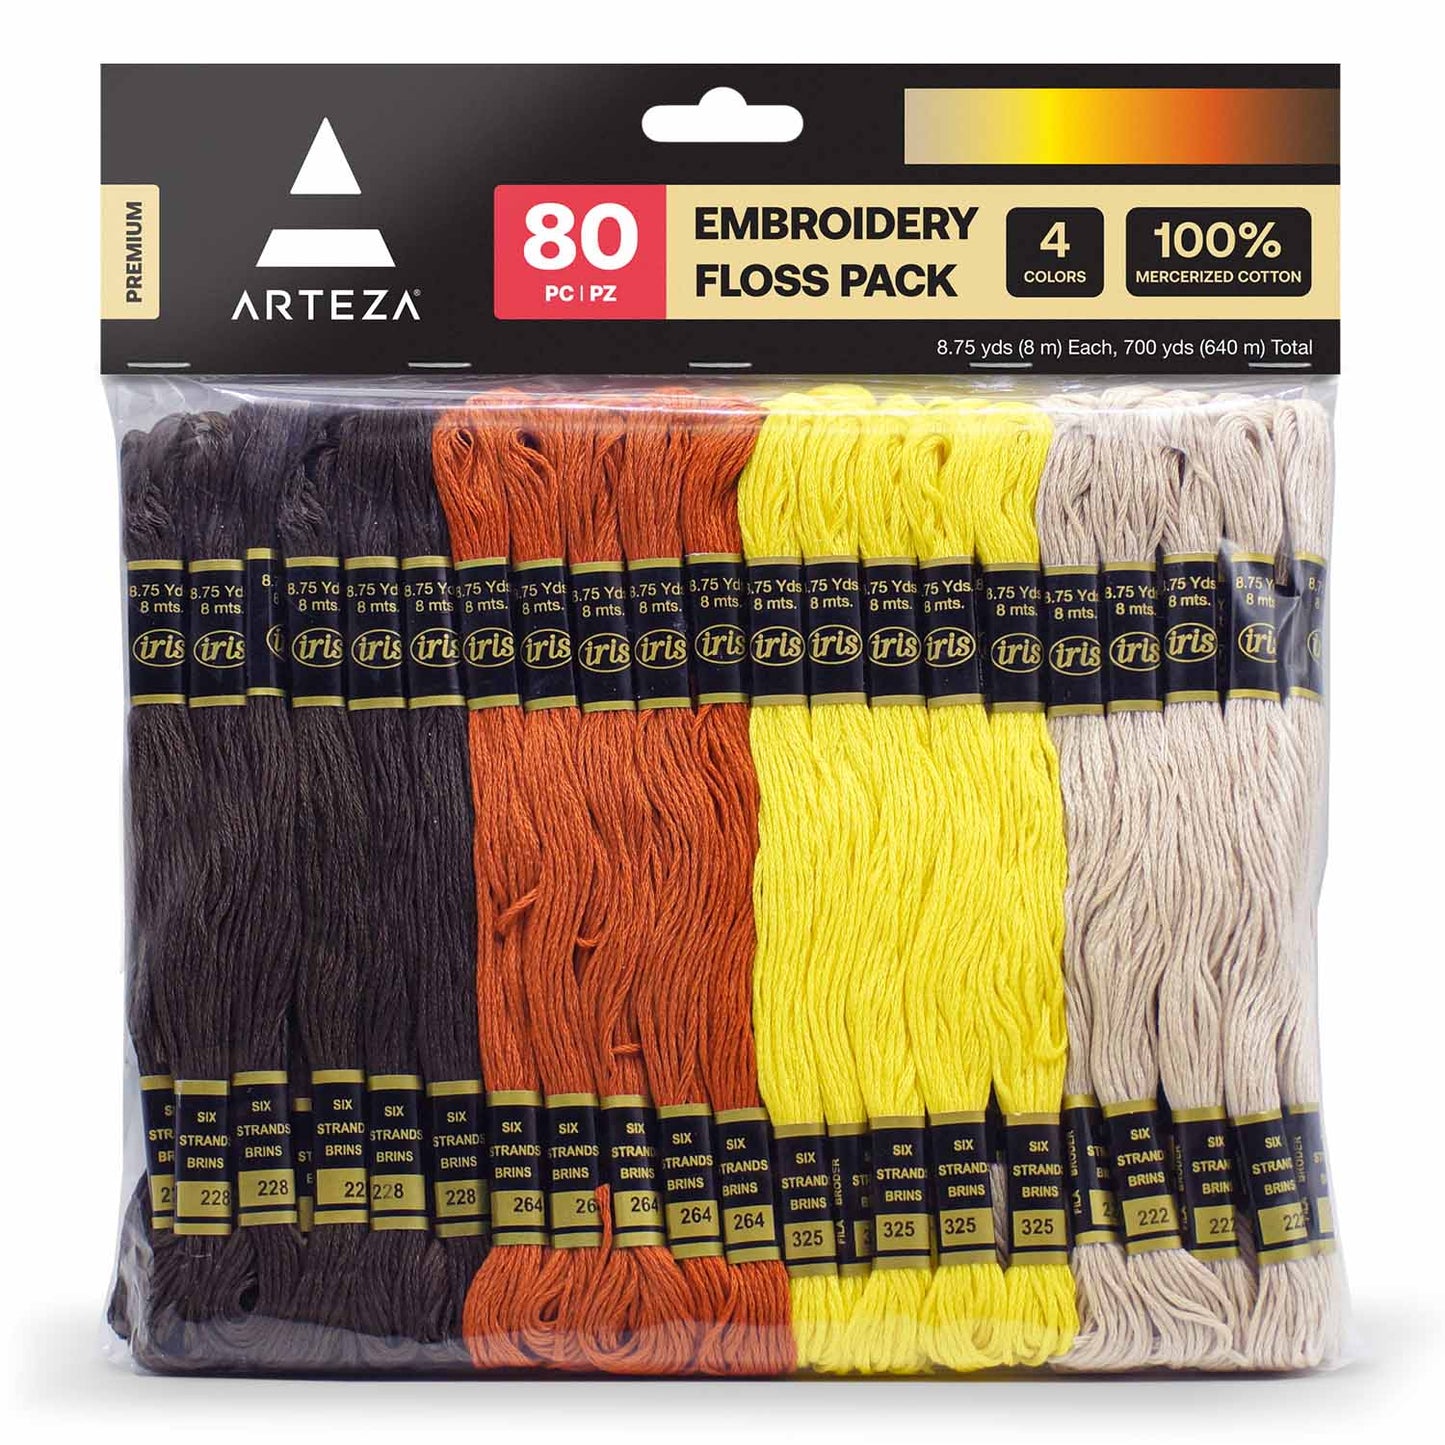 Embroidery Floss, Brown, Yellow & Orange Tones - 80 Pieces